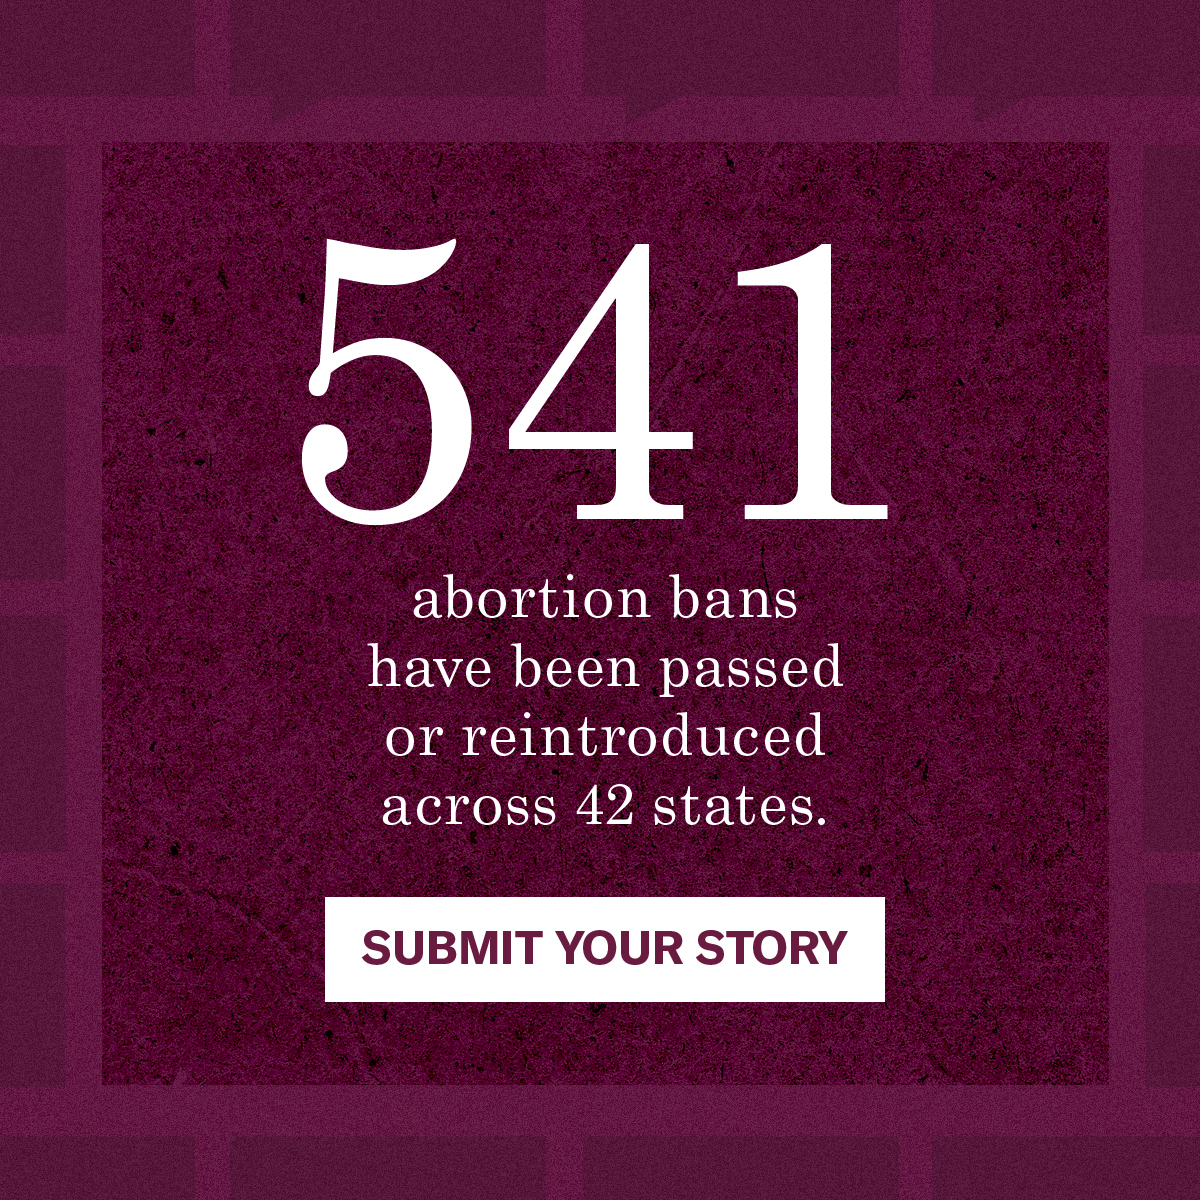 541 abortion bans have been passed or reintroduced across 42 states.